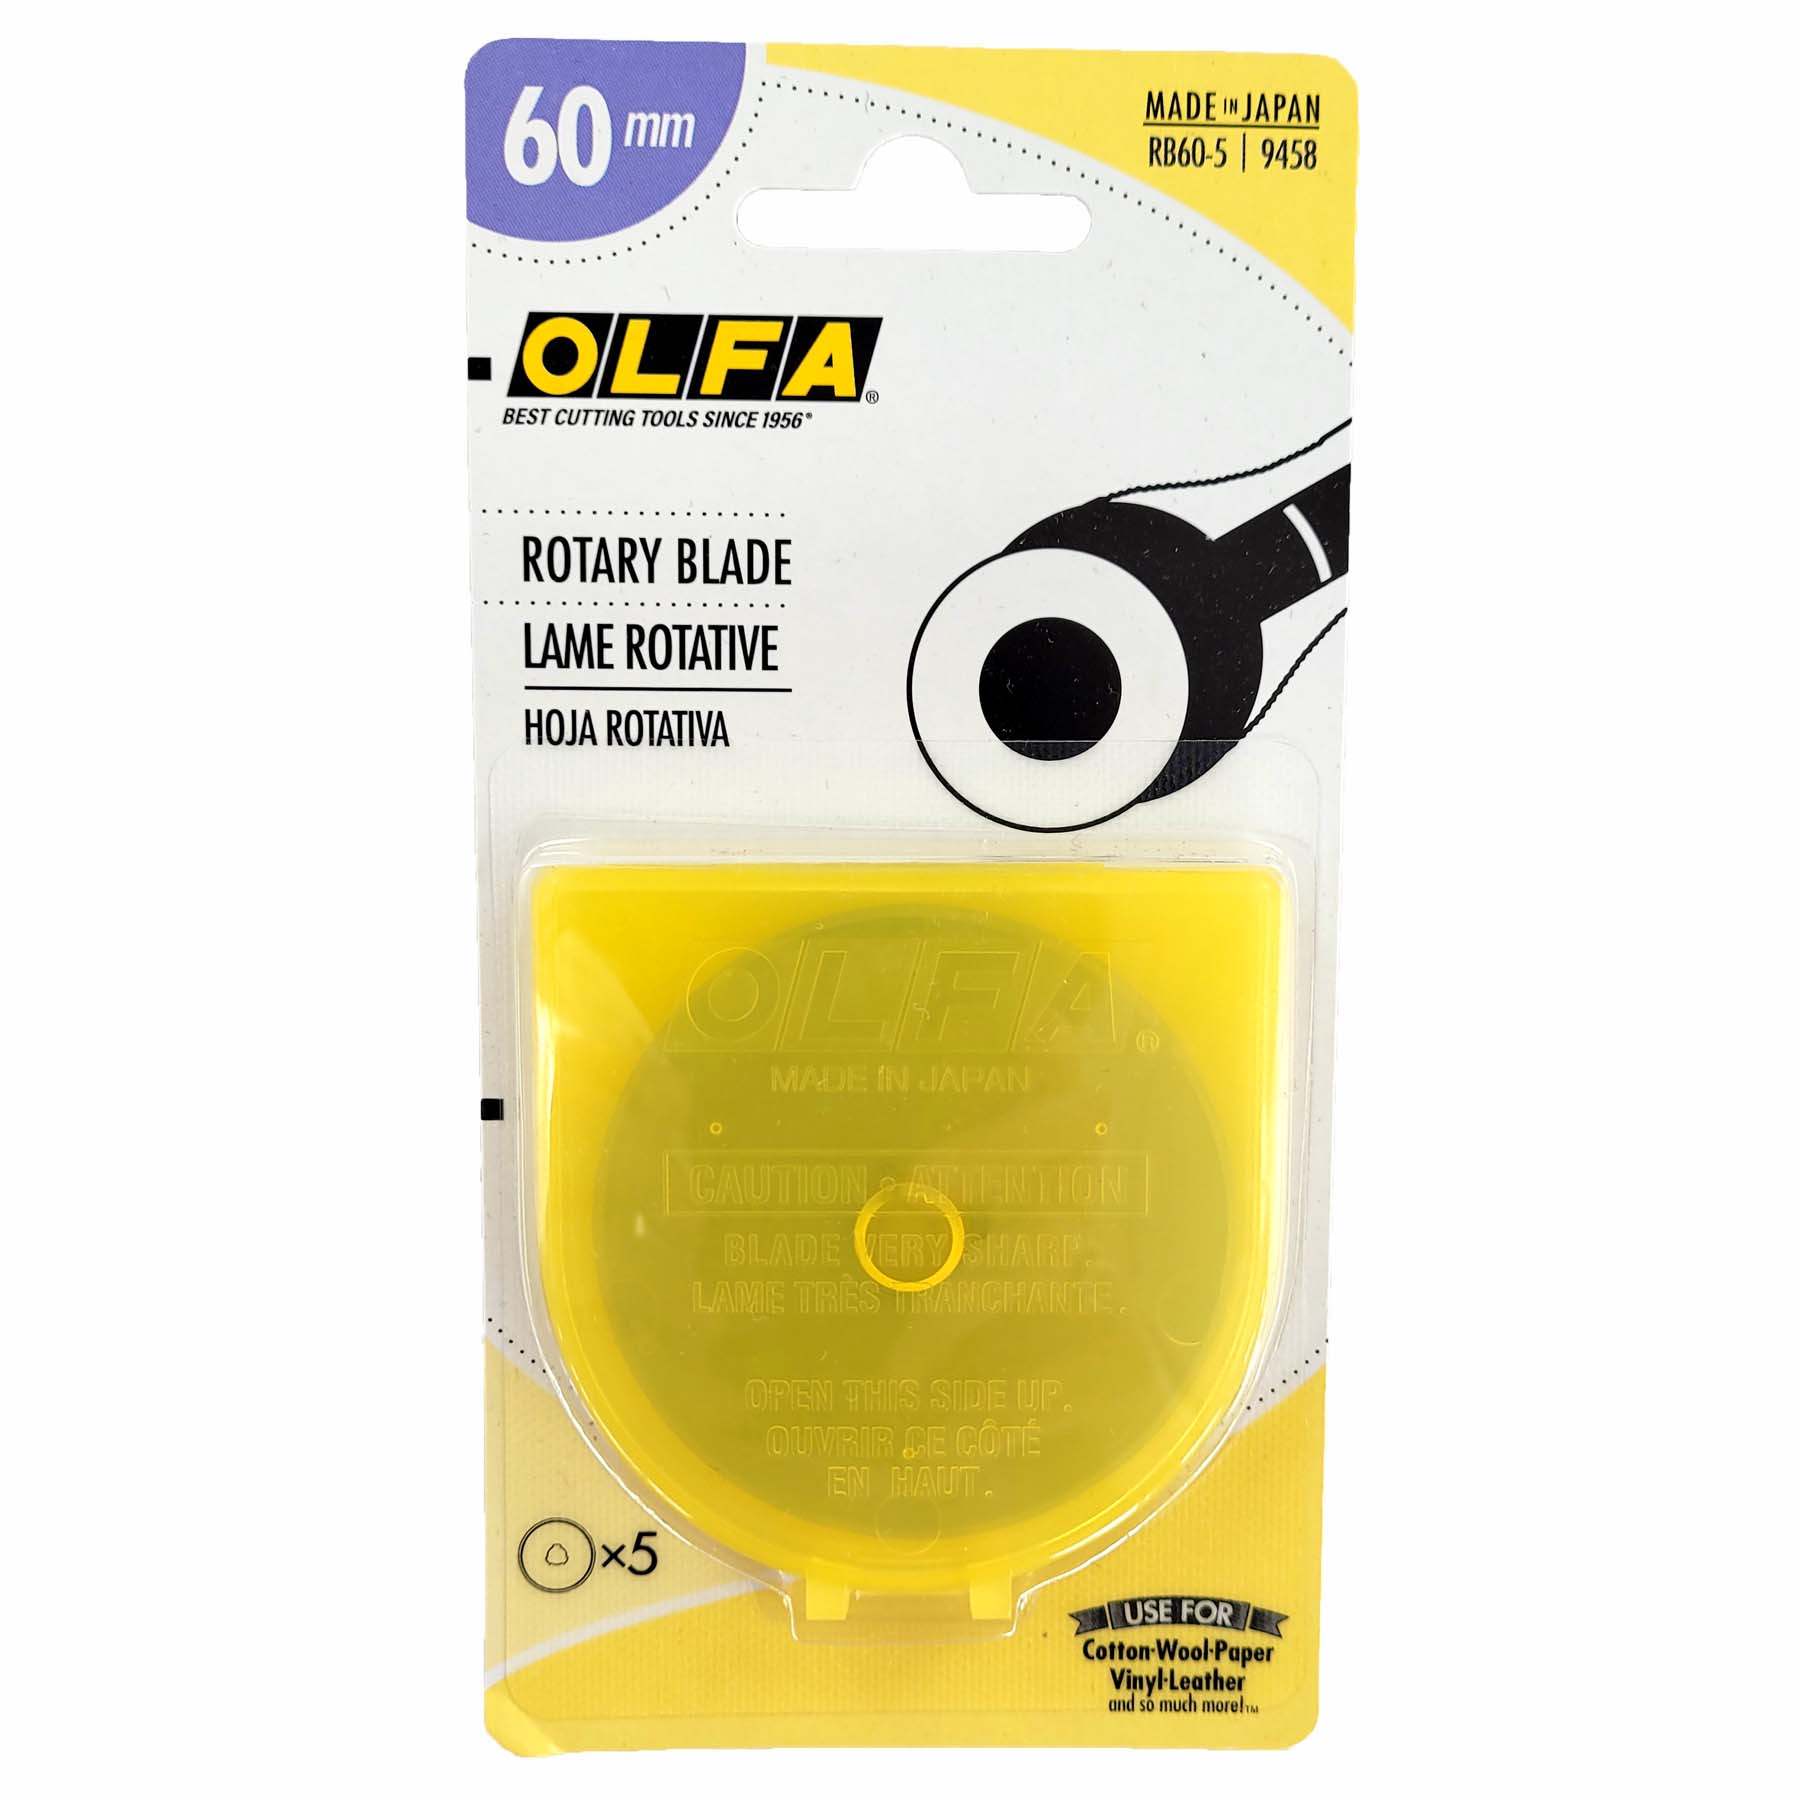 Olfa 60mm Replacement Blade for Rotary Cutter